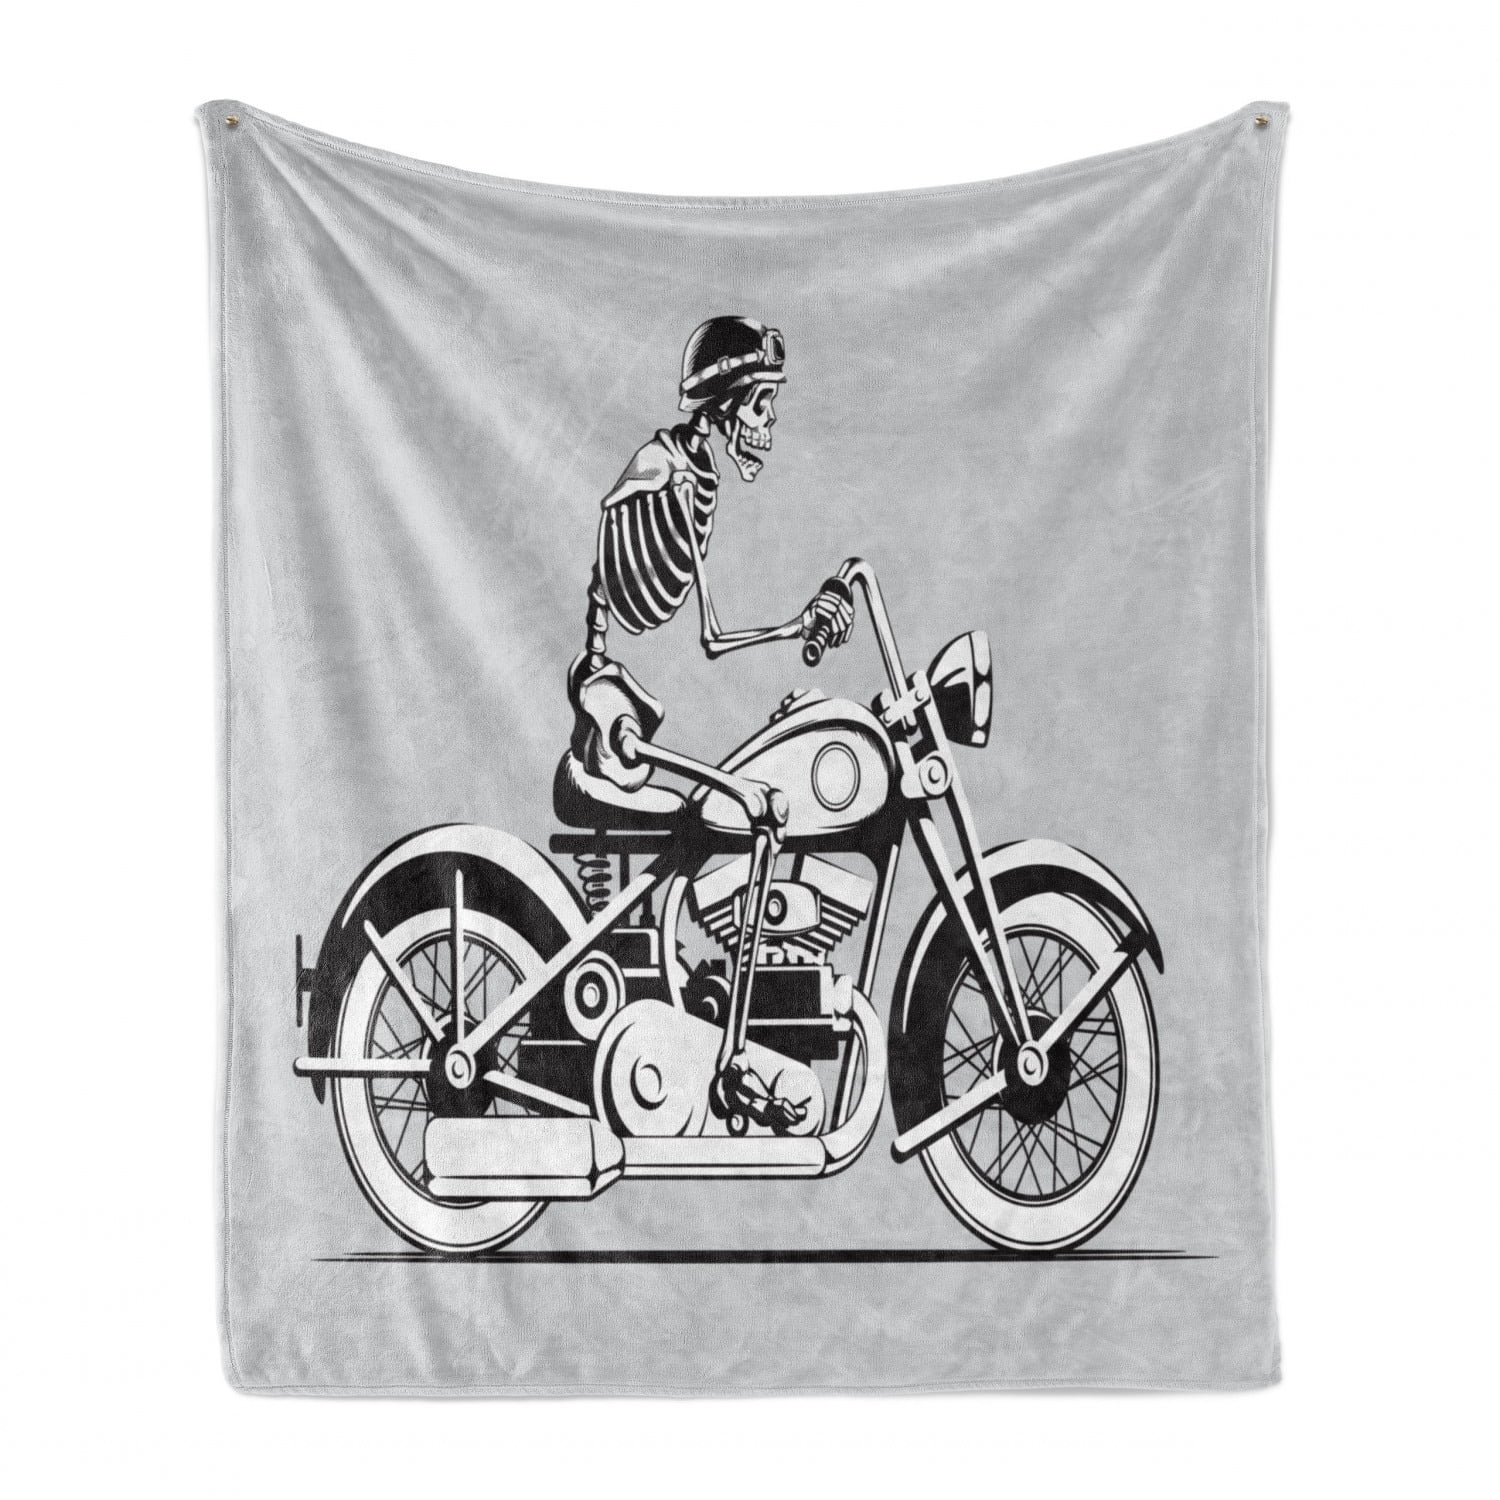 Cozy Plush for Indoor and Outdoor Use 50 x 70 Ambesonne Skeleton Soft Flannel Fleece Throw Blanket Vintage Themed Halloween Riding Motorcycle with Hat Pale Grey Charcoal Grey